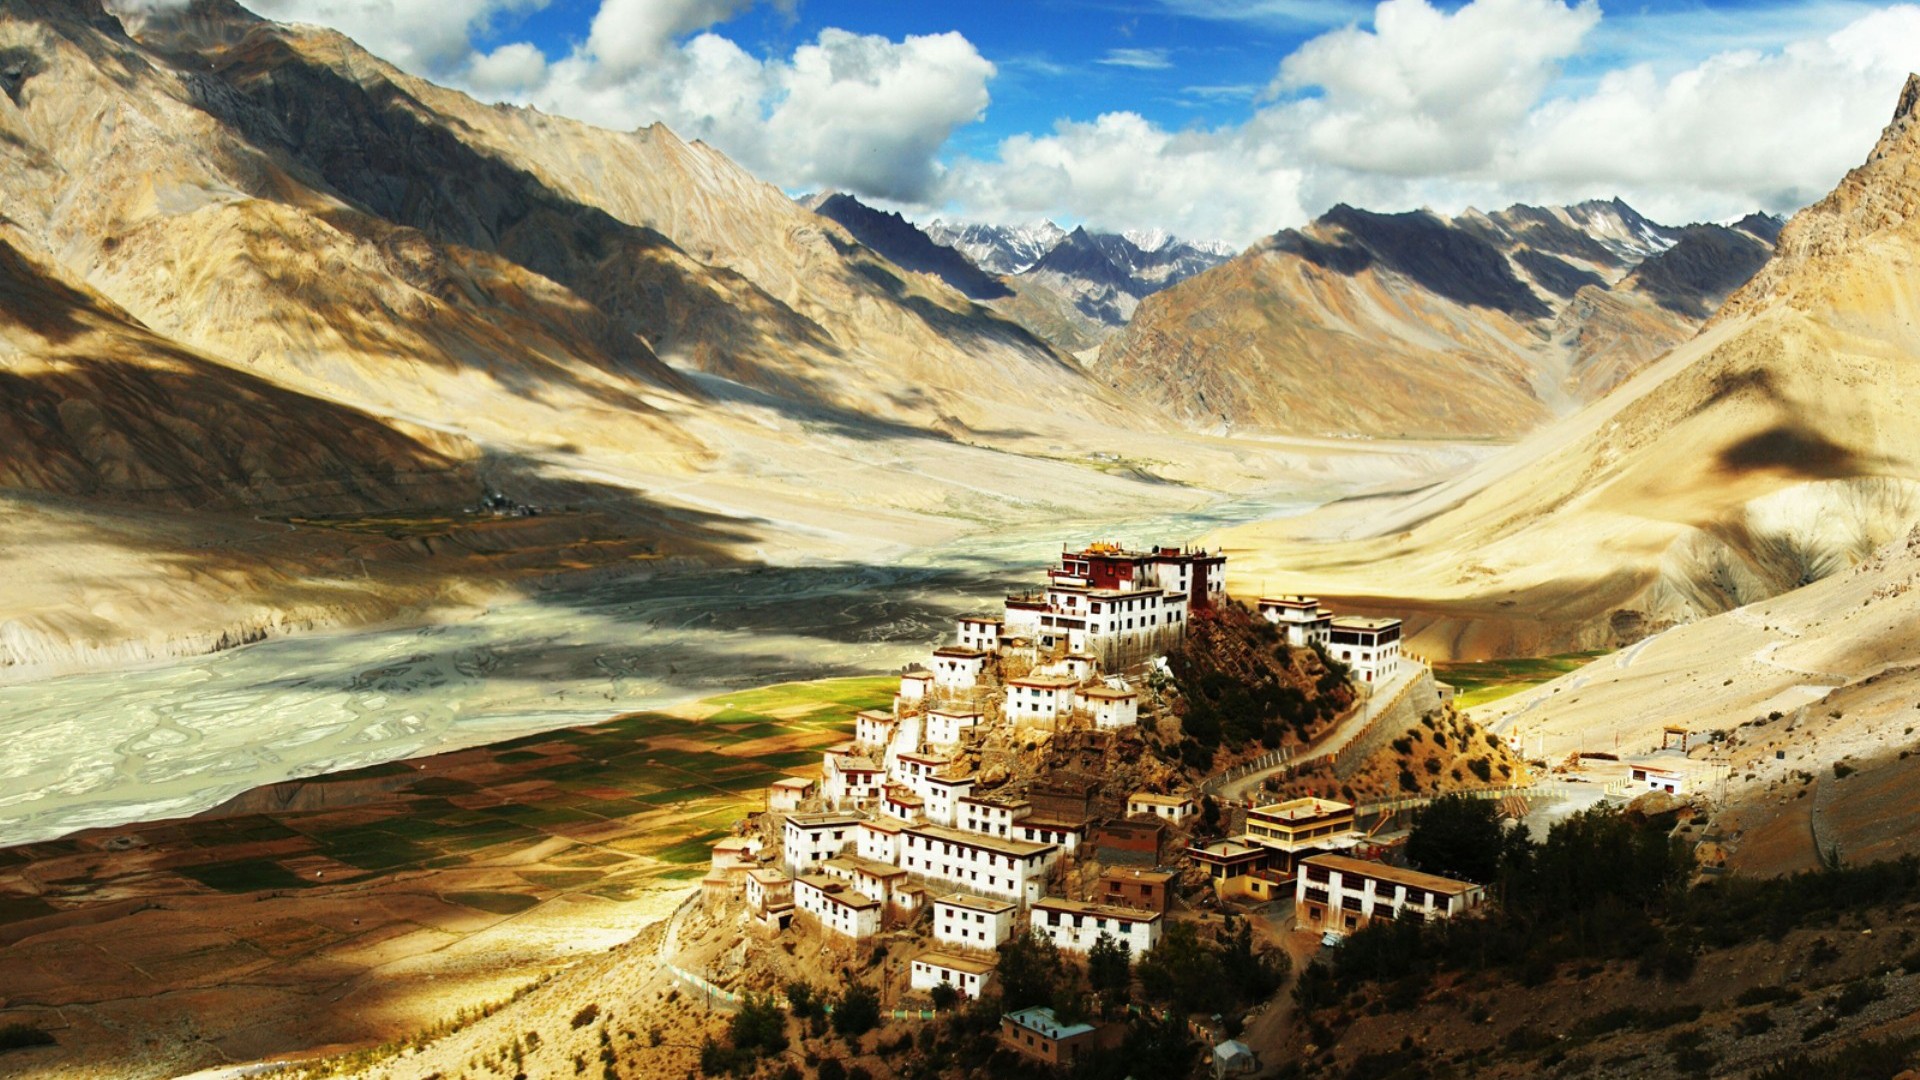 General 1920x1080 Tibet monastery Himalayas National Geographic mountains landscape Asia nature